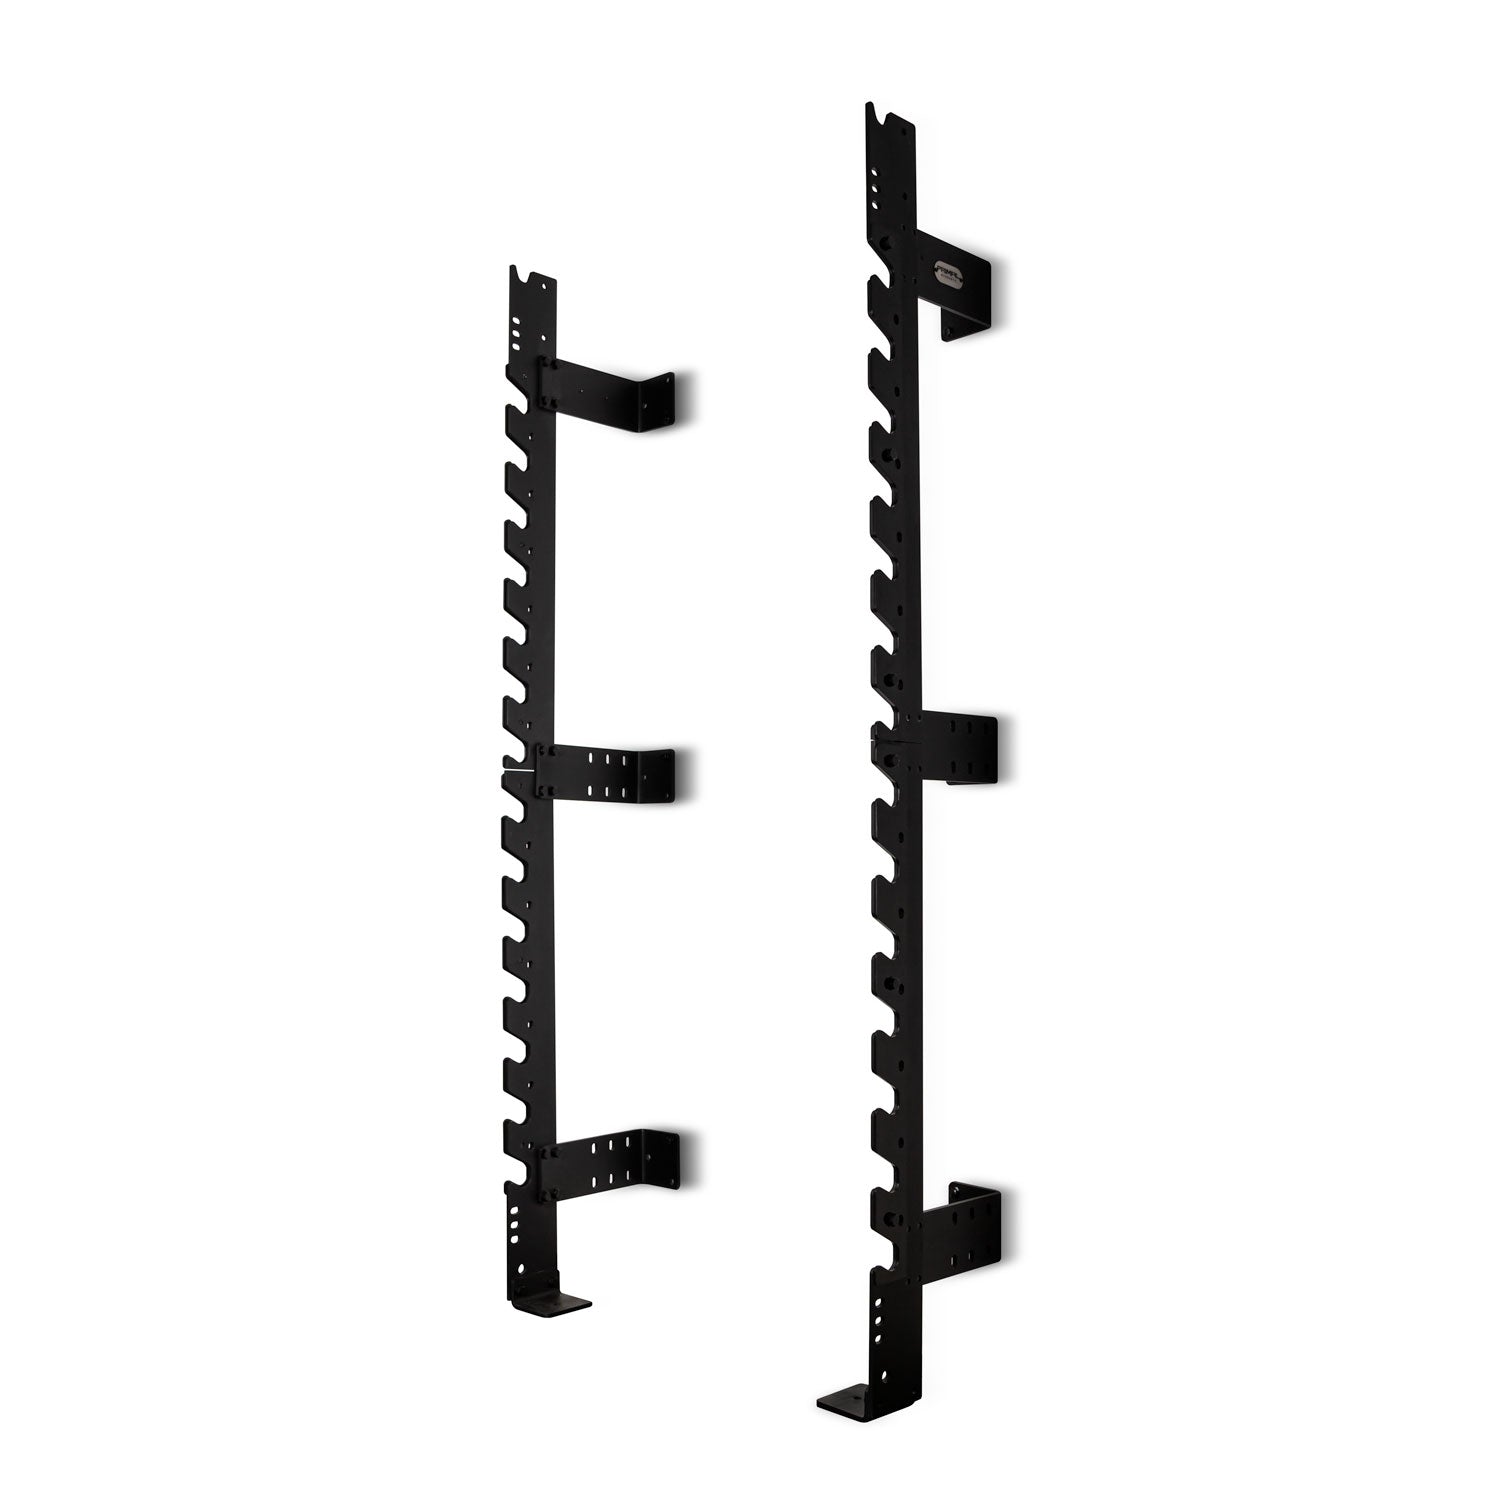 Primal Strength Wall Mounted Rack with UHMW Covers and Fixings